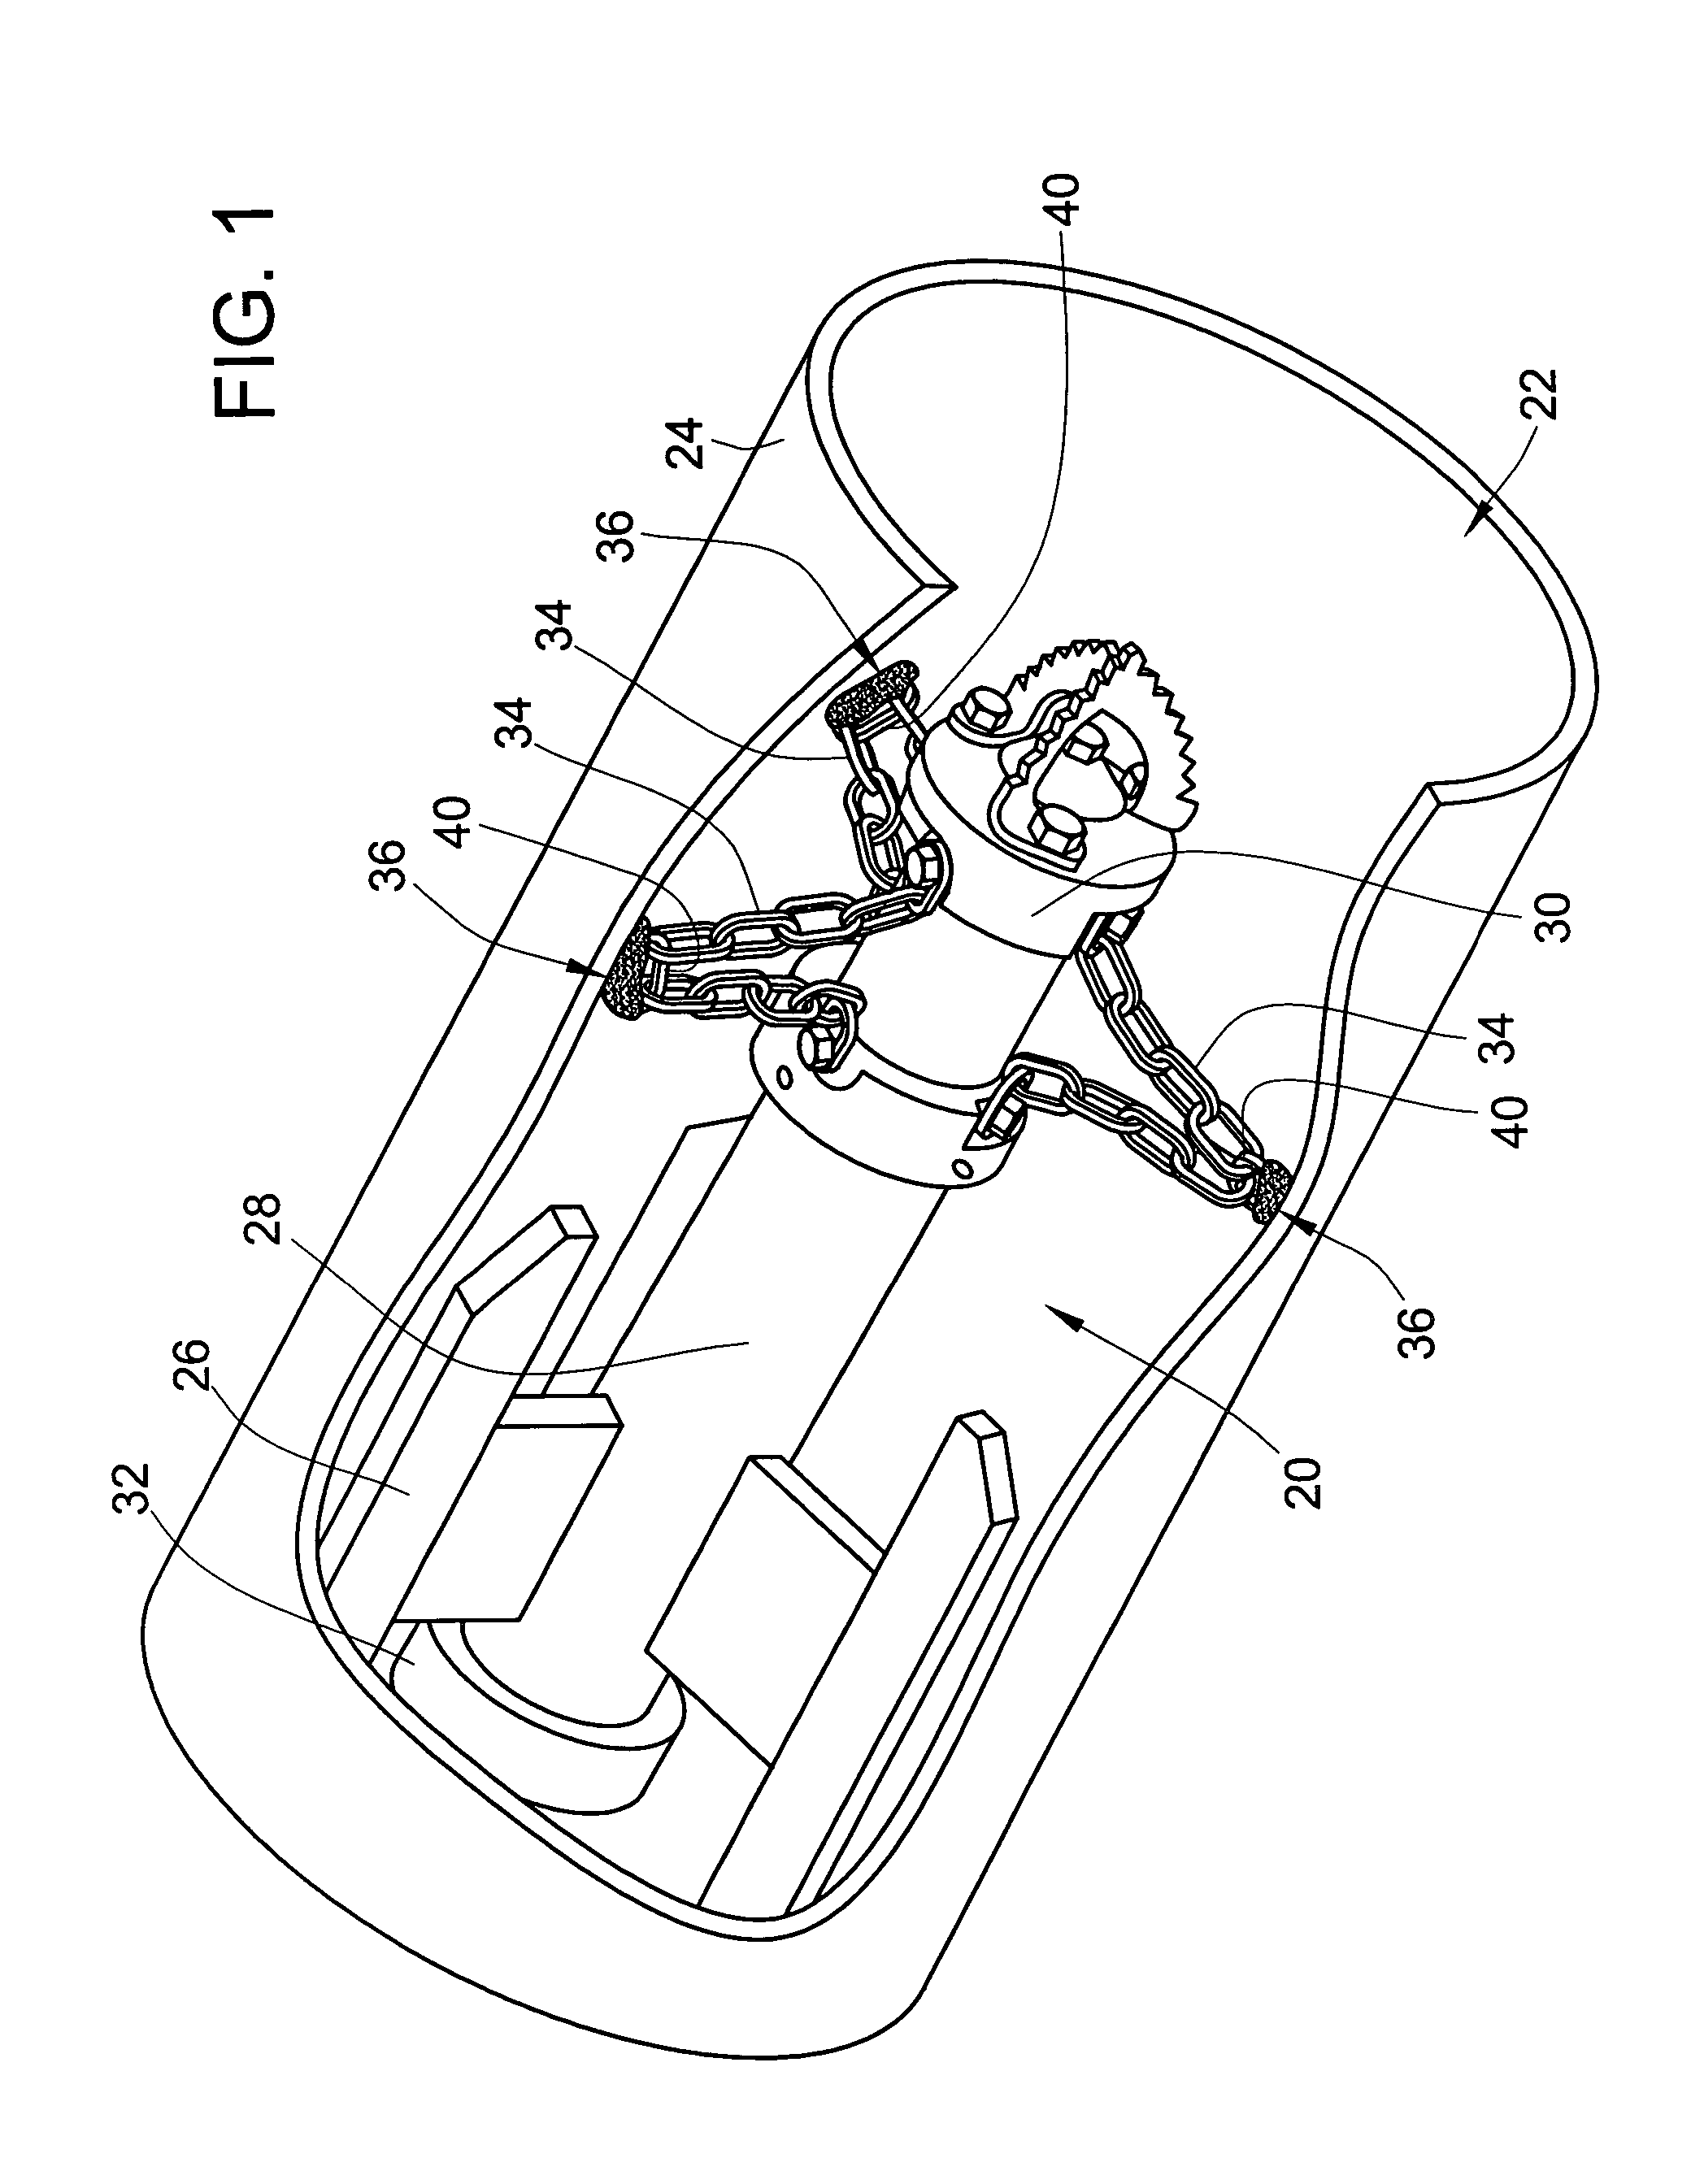 Apparatus and bit for cleaning pipes